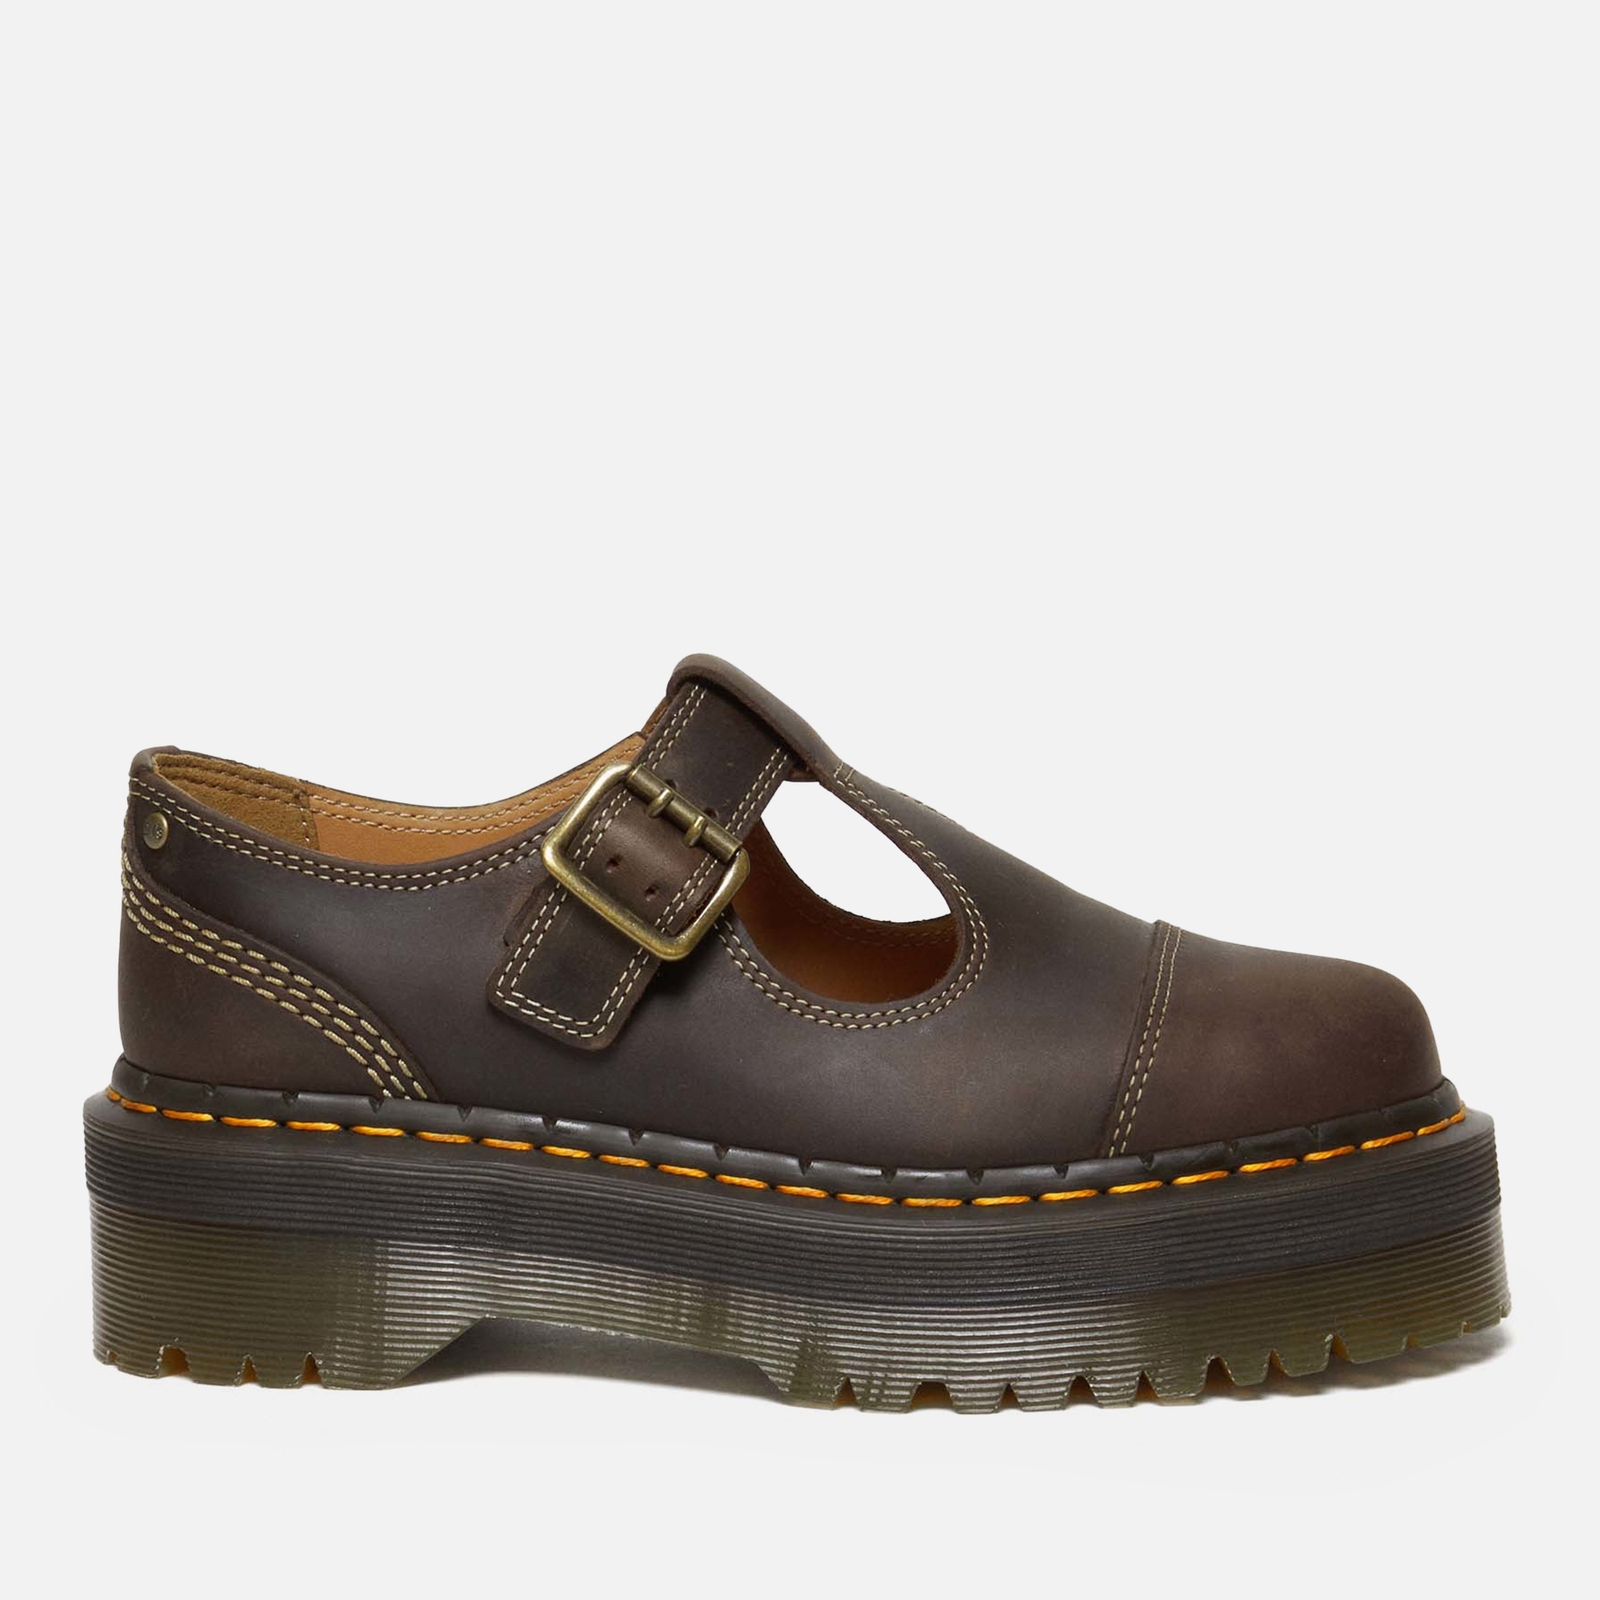 Dr. Martens Bethan Leather Quad Mary-Jane Shoes - UK 3